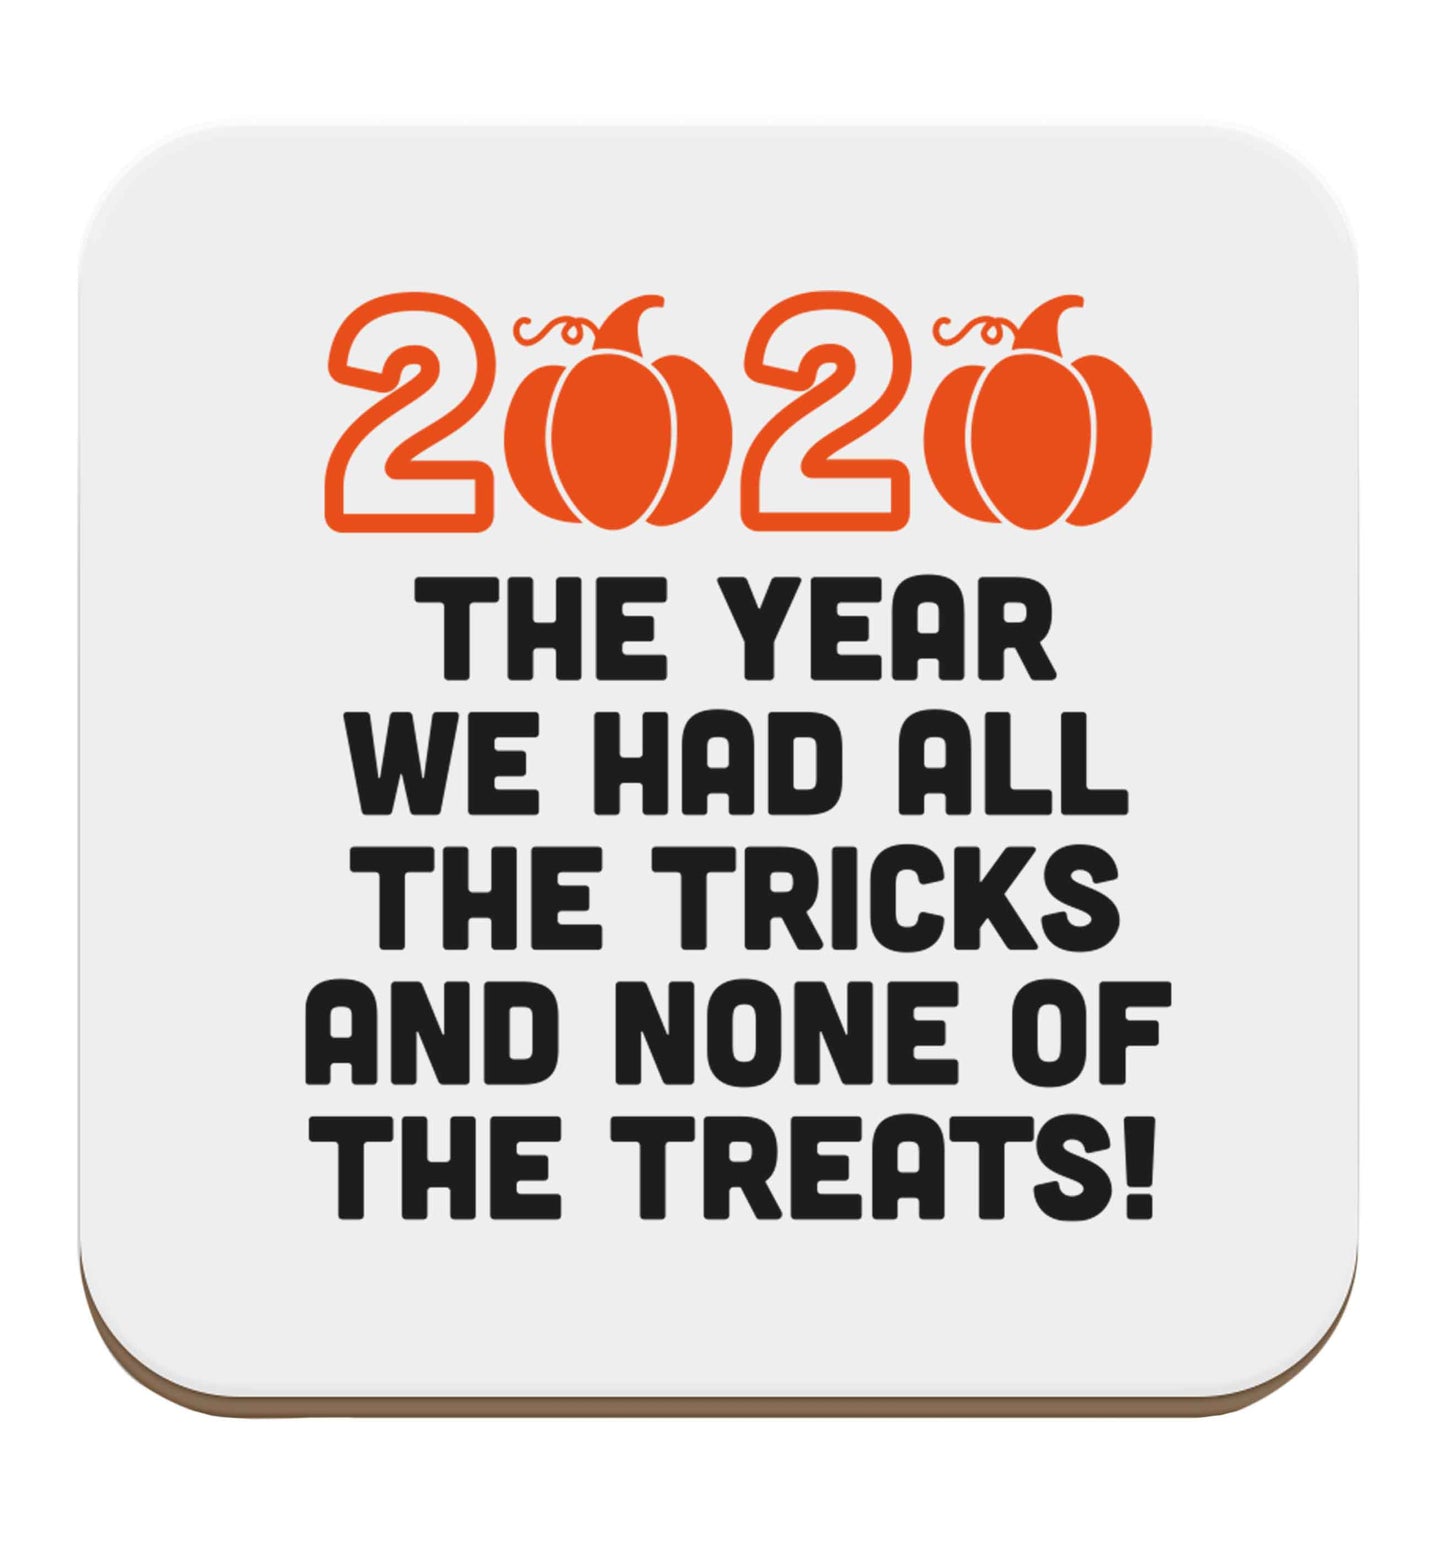 2020 The year we had all of the tricks and none of the treats set of four coasters